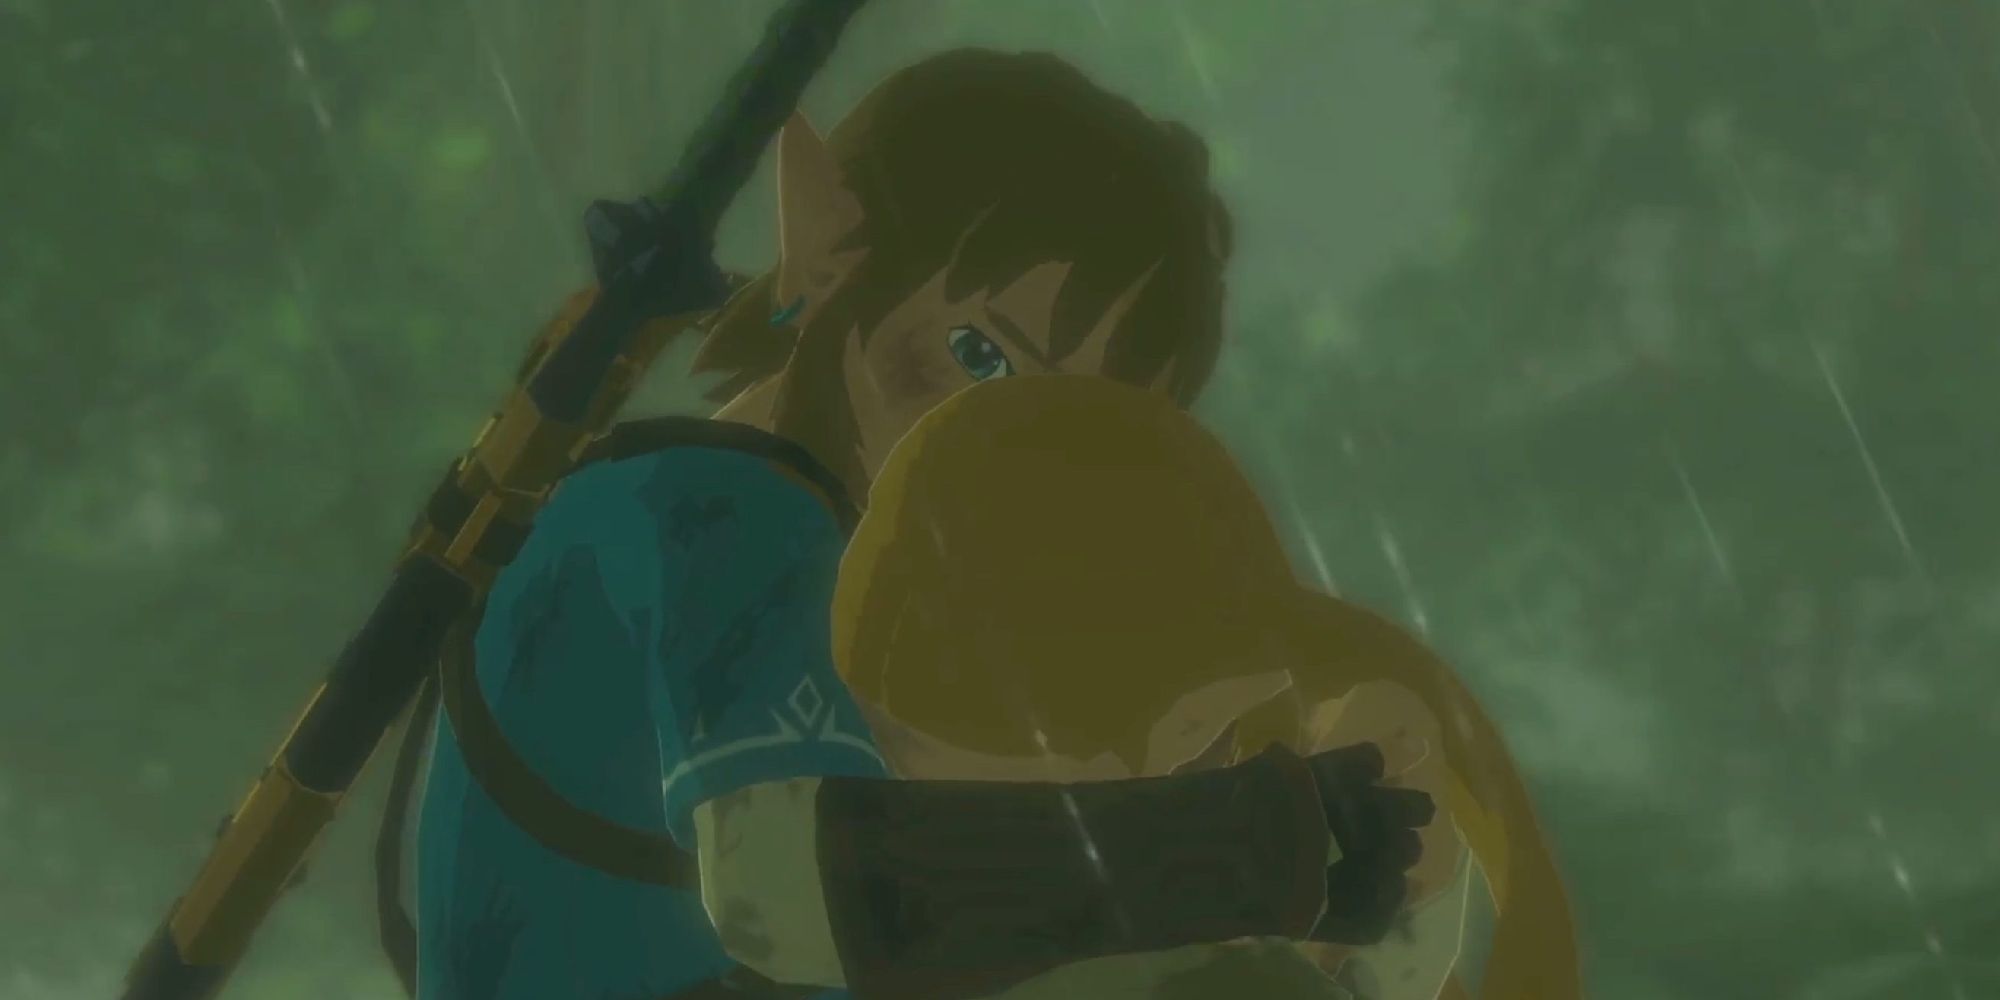 Link comforting a crying Princess Zelda in the rain in Breath of the Wild